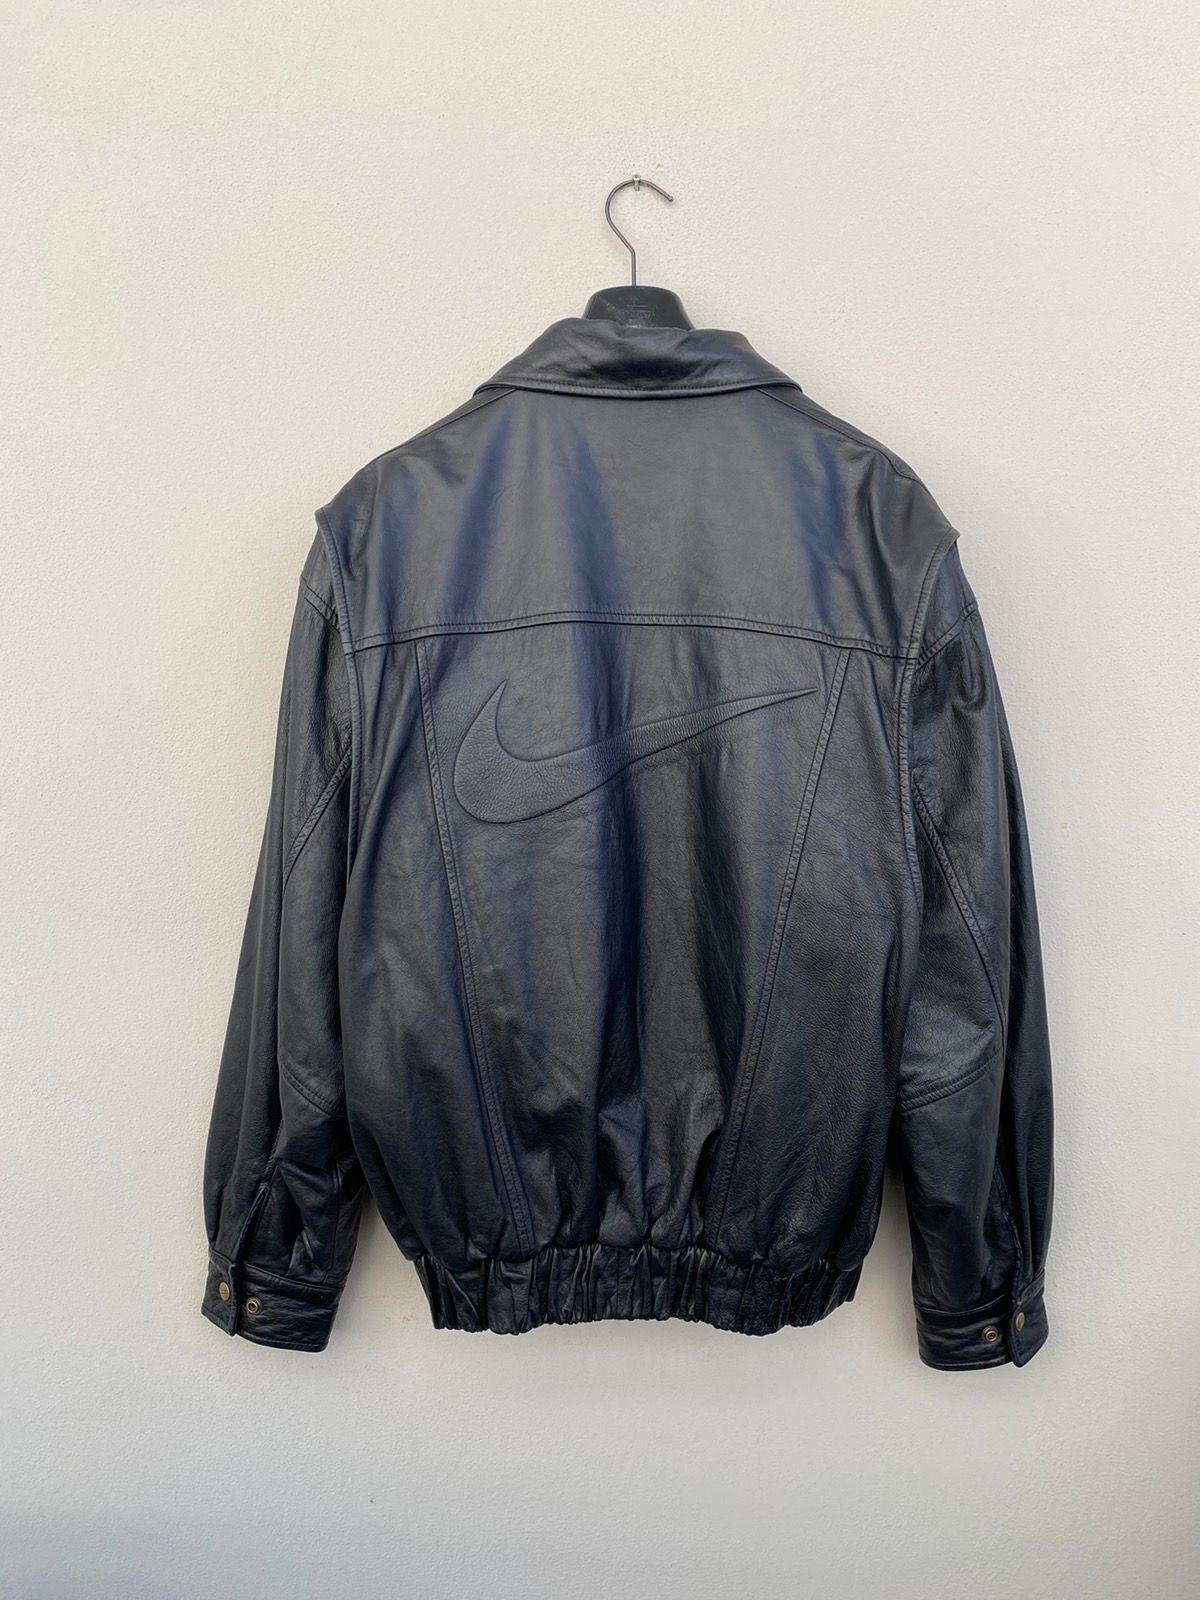 Pre-owned Leather Jacket X Nike Ultra Vintage Nike Big Swoosh Leather Bomber In Black